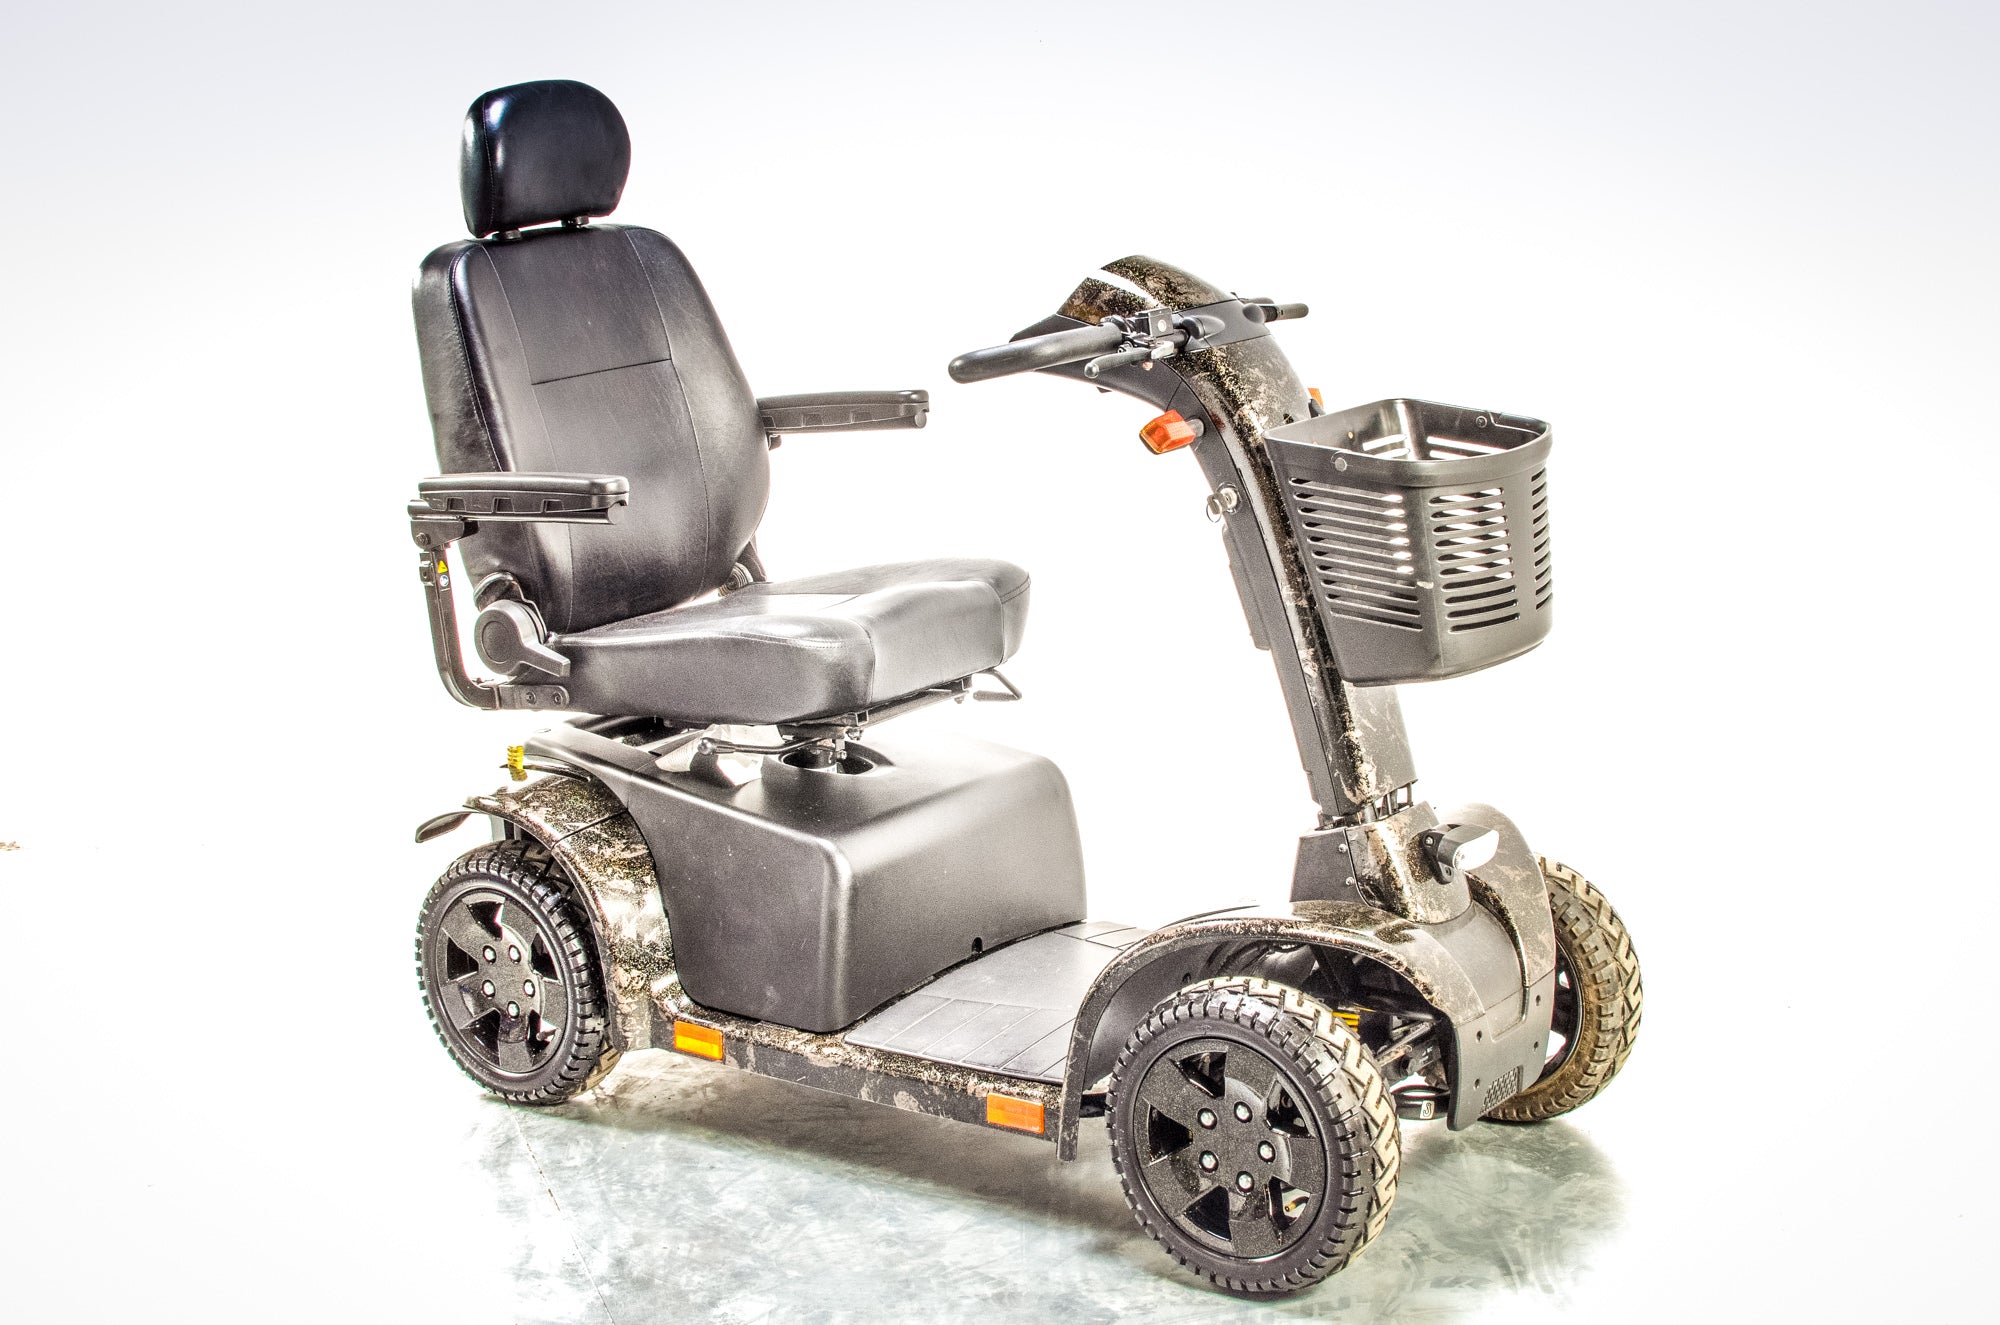 Pride Colt Pursuit Used Electric Mobility Scooter 8mph Transportable Large All-Terrain